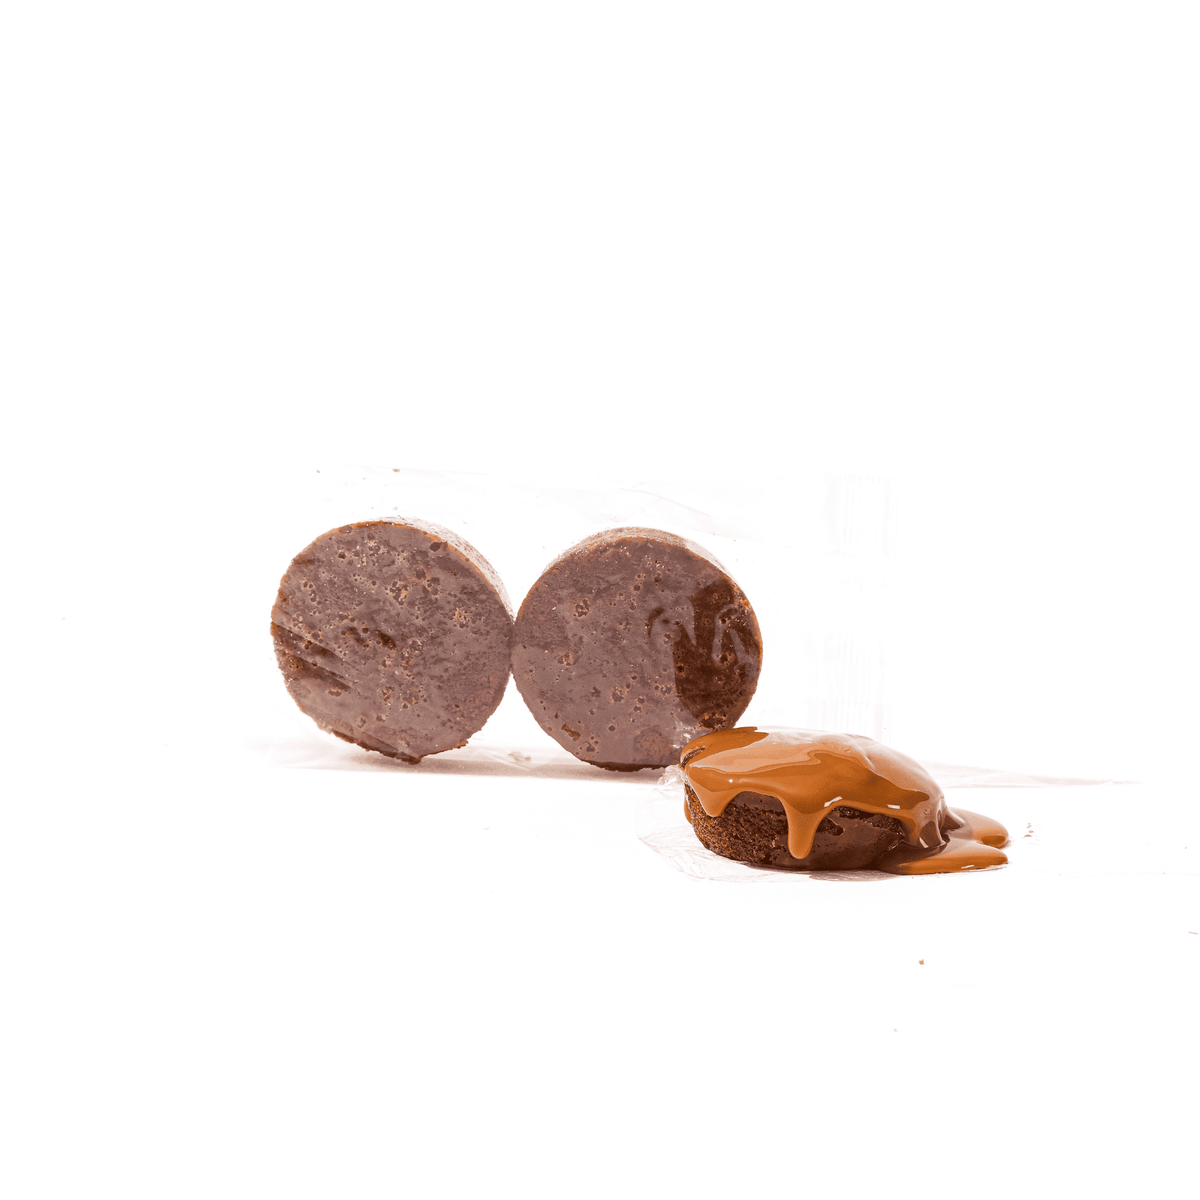 A Sticky Toffee Keto Cake Bite | Limited Edition by No Guilt Bakes, with a piece of chocolate and a piece of caramel on a white surface, ideal for those who prefer a no-added sugar alternative or are following a keto diet. Perfect as sticky toffee treats.